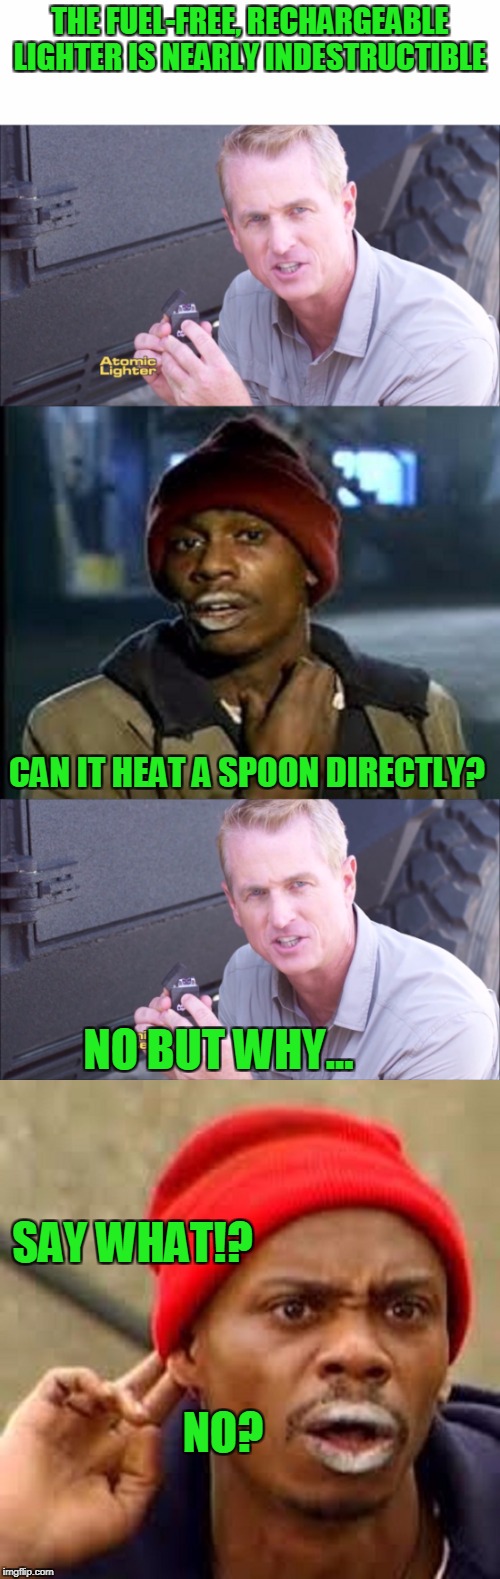 Tyrone does not approve  | THE FUEL-FREE, RECHARGEABLE LIGHTER IS NEARLY INDESTRUCTIBLE; CAN IT HEAT A SPOON DIRECTLY? NO BUT WHY... SAY WHAT!? NO? | image tagged in tyrone biggums | made w/ Imgflip meme maker